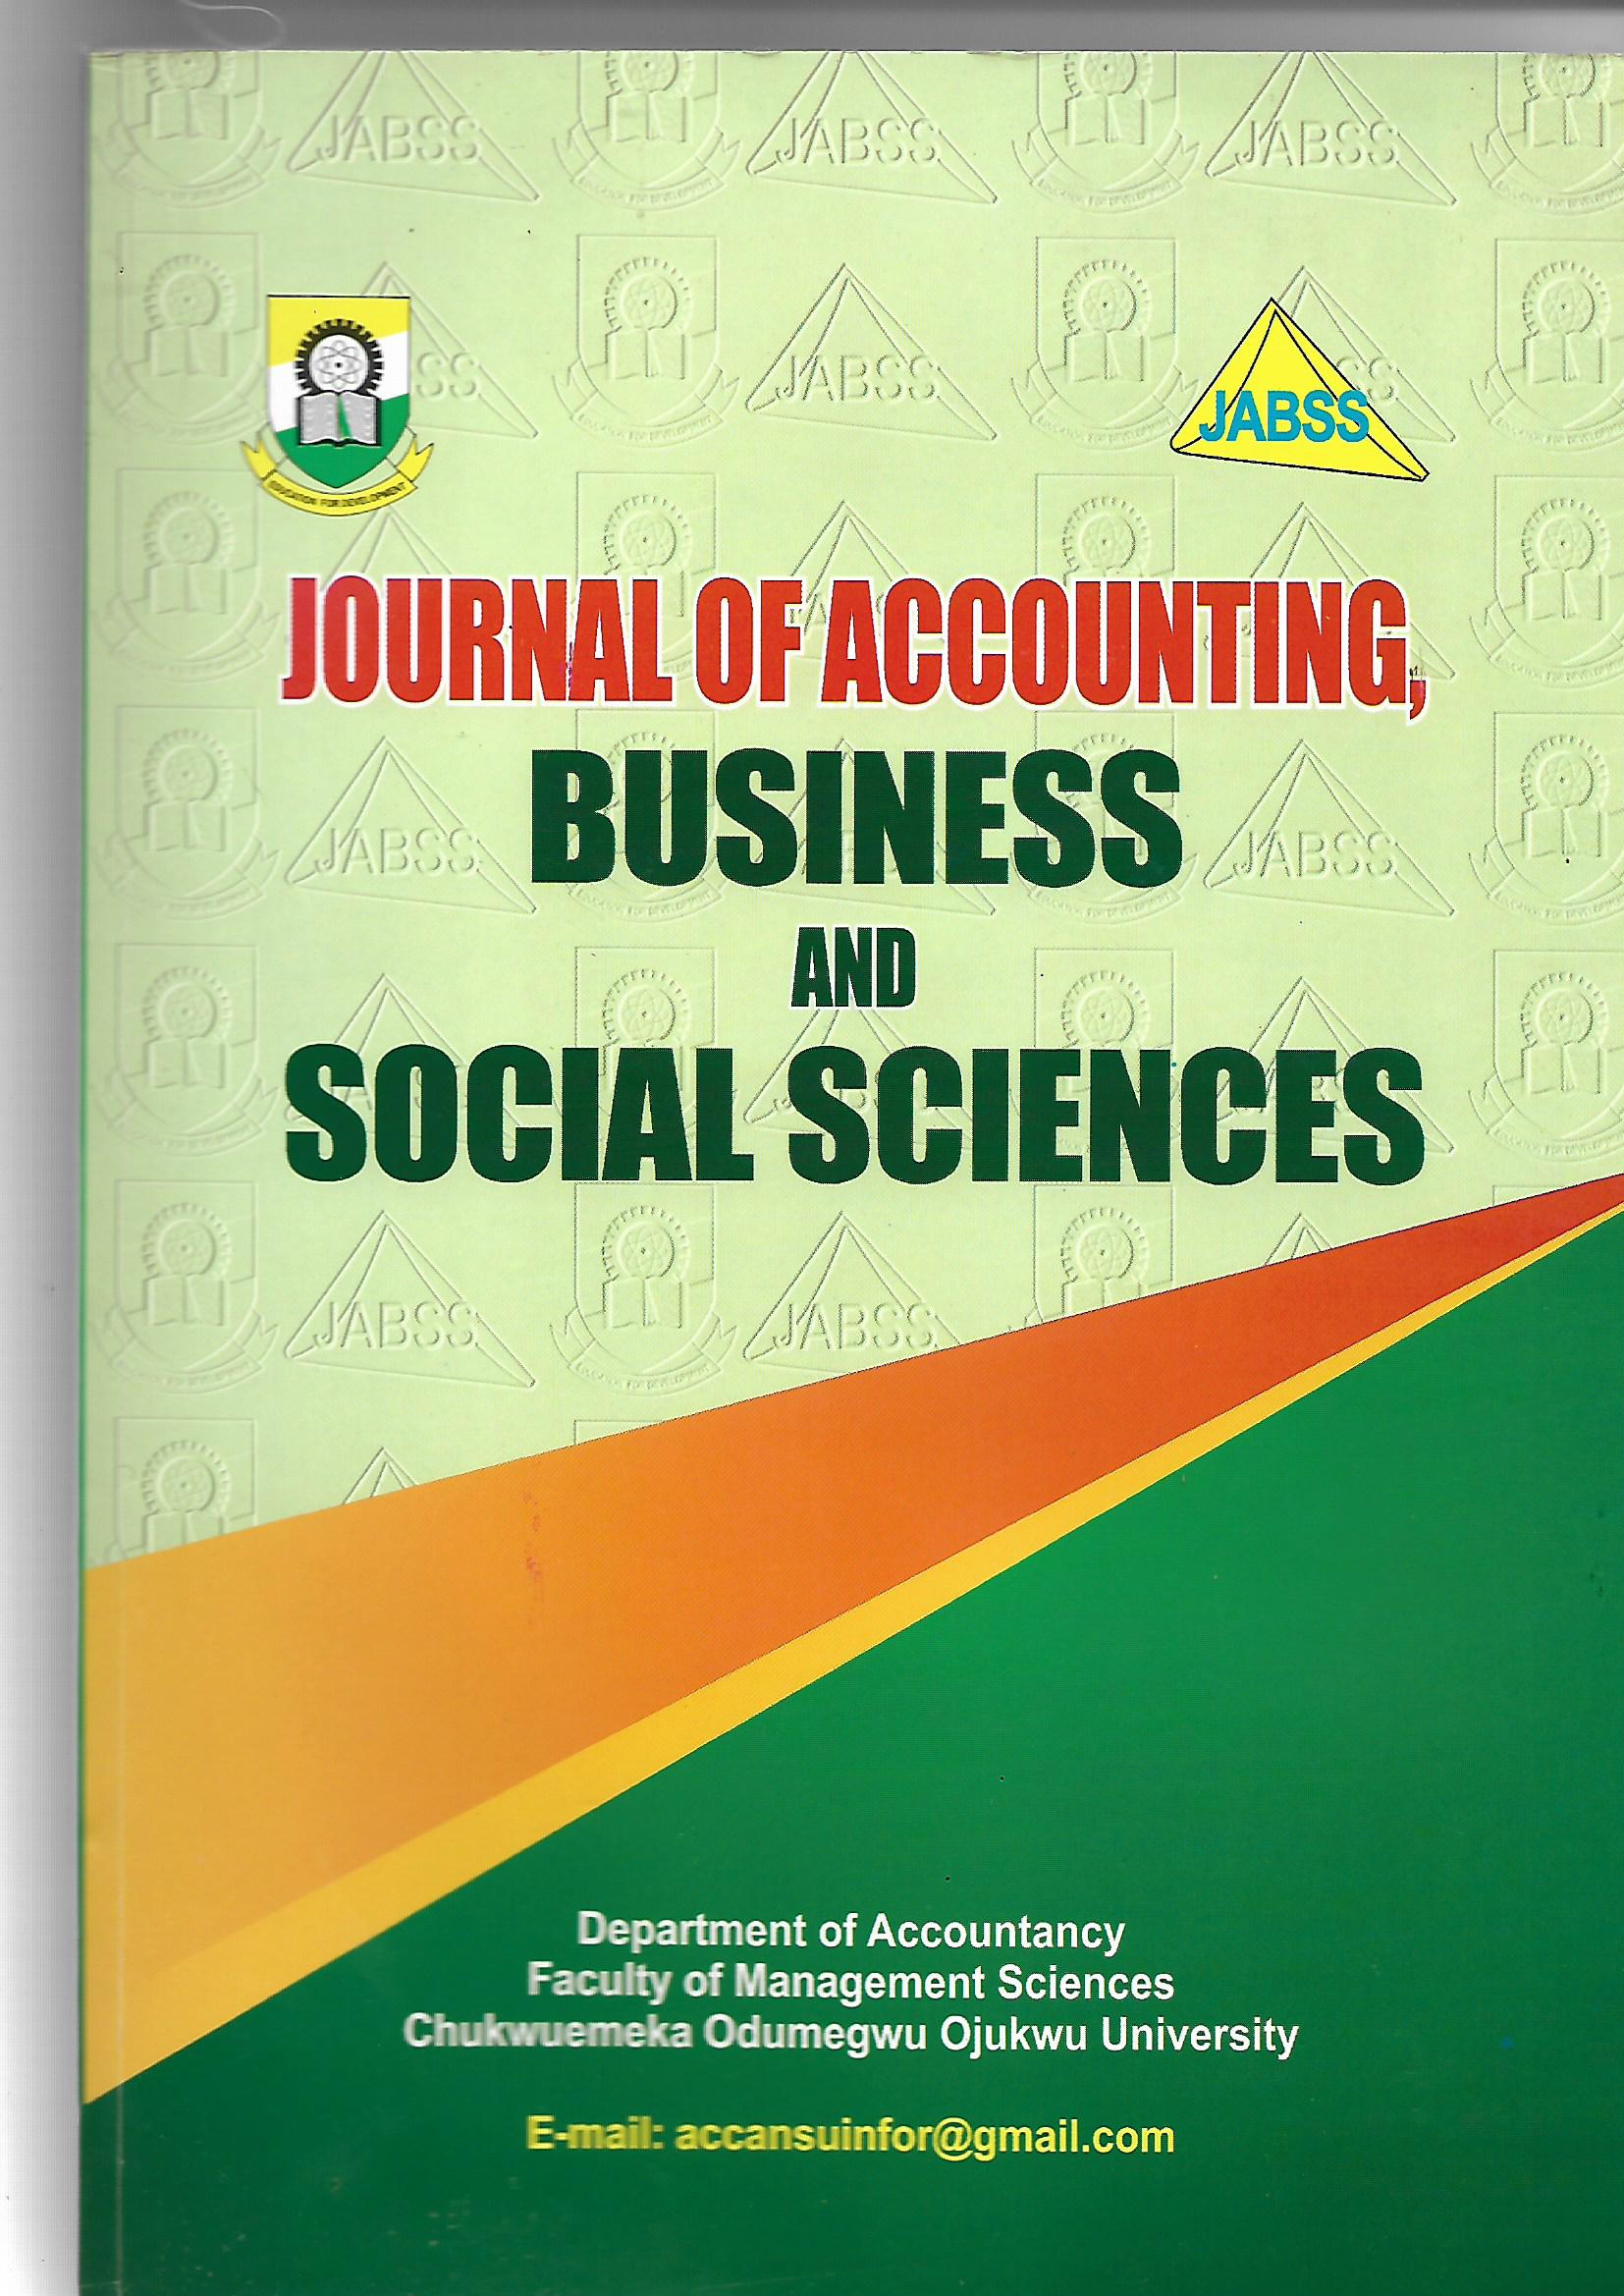 Journal of Accounting, Business and Social Sciences